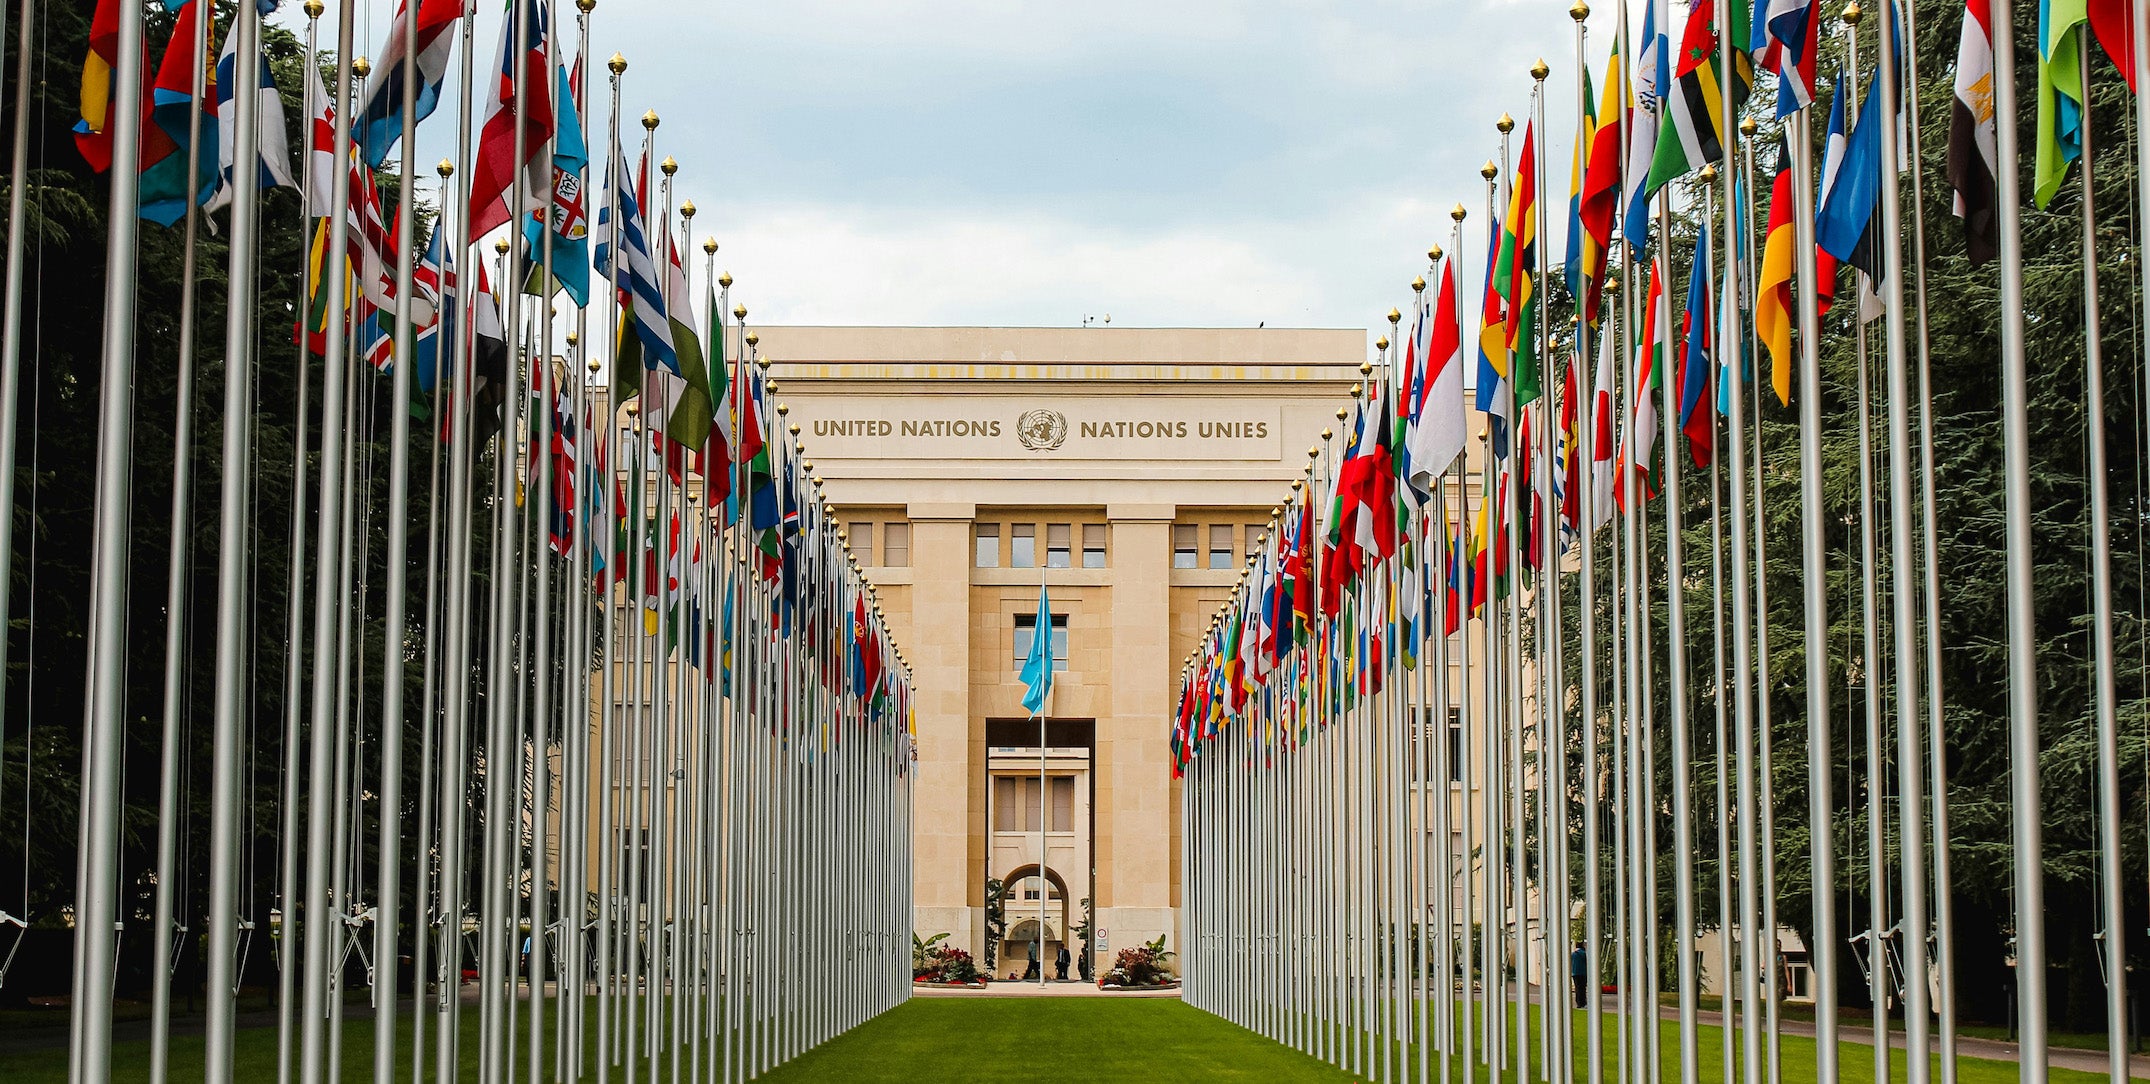 The united nations building in Switzerland, with many international flags in two rows in front